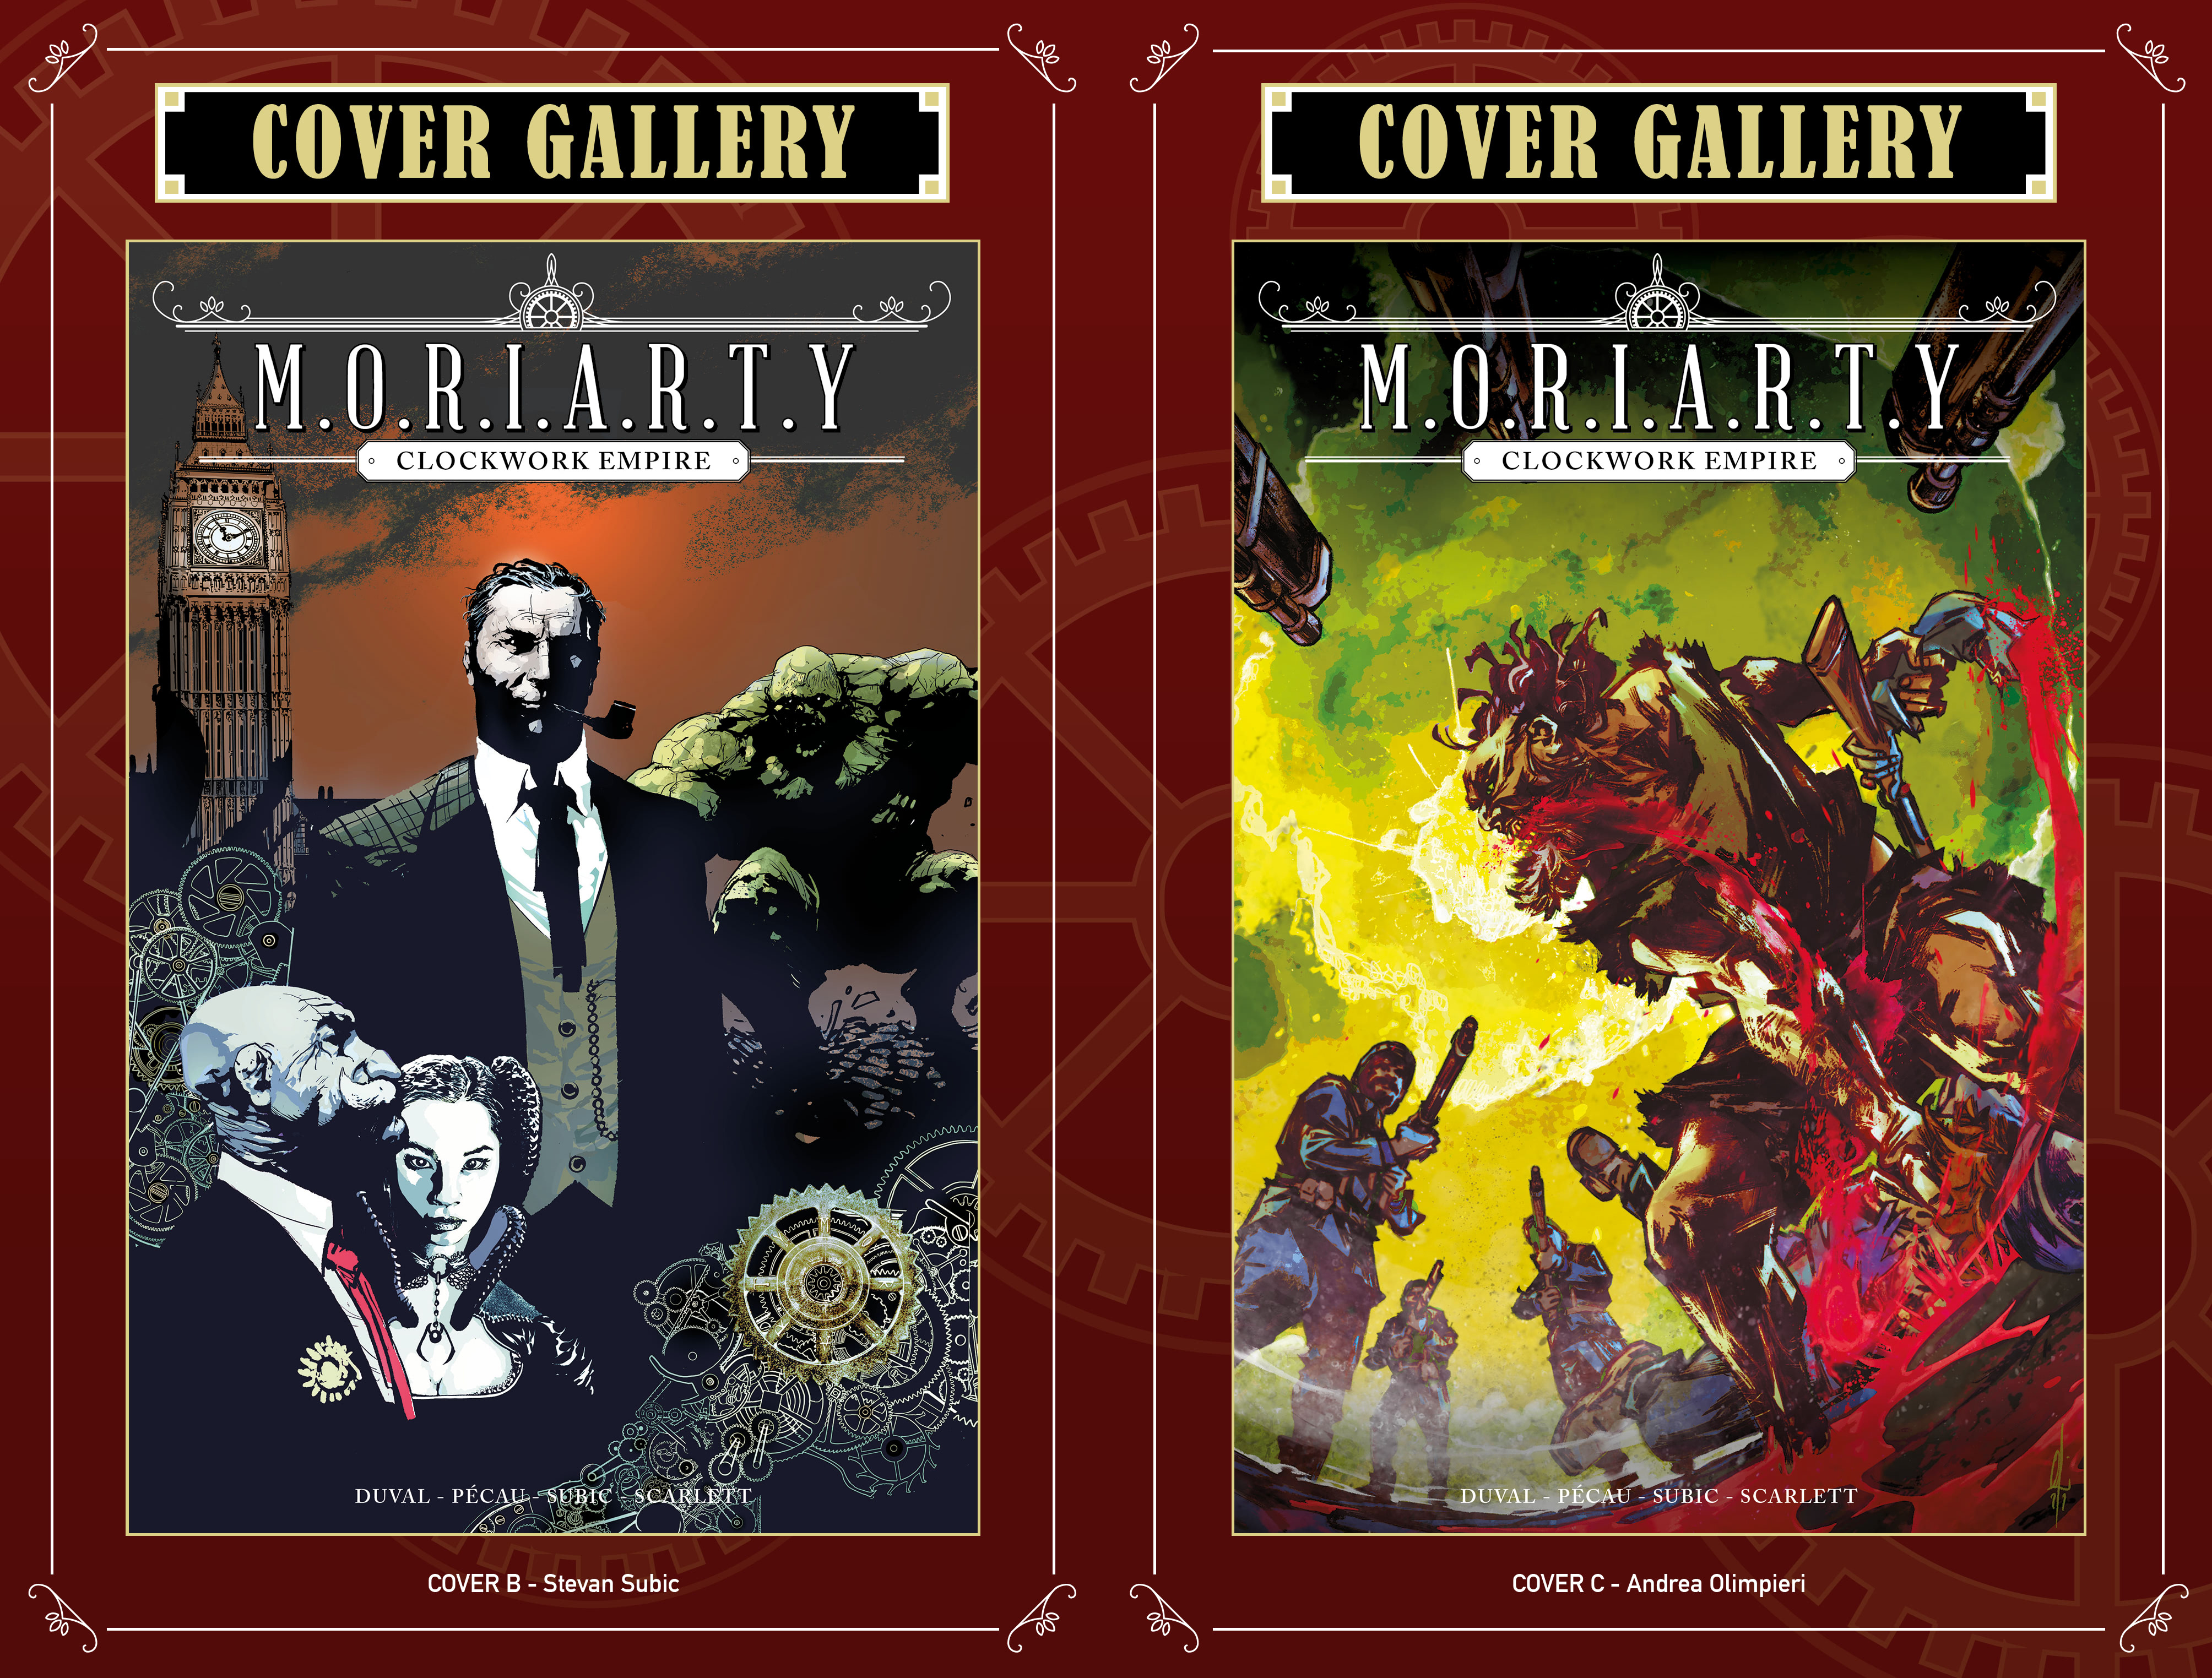 Read online M.O.R.I.A.R.T.Y : The Clockwork Empire comic -  Issue #1 - 42